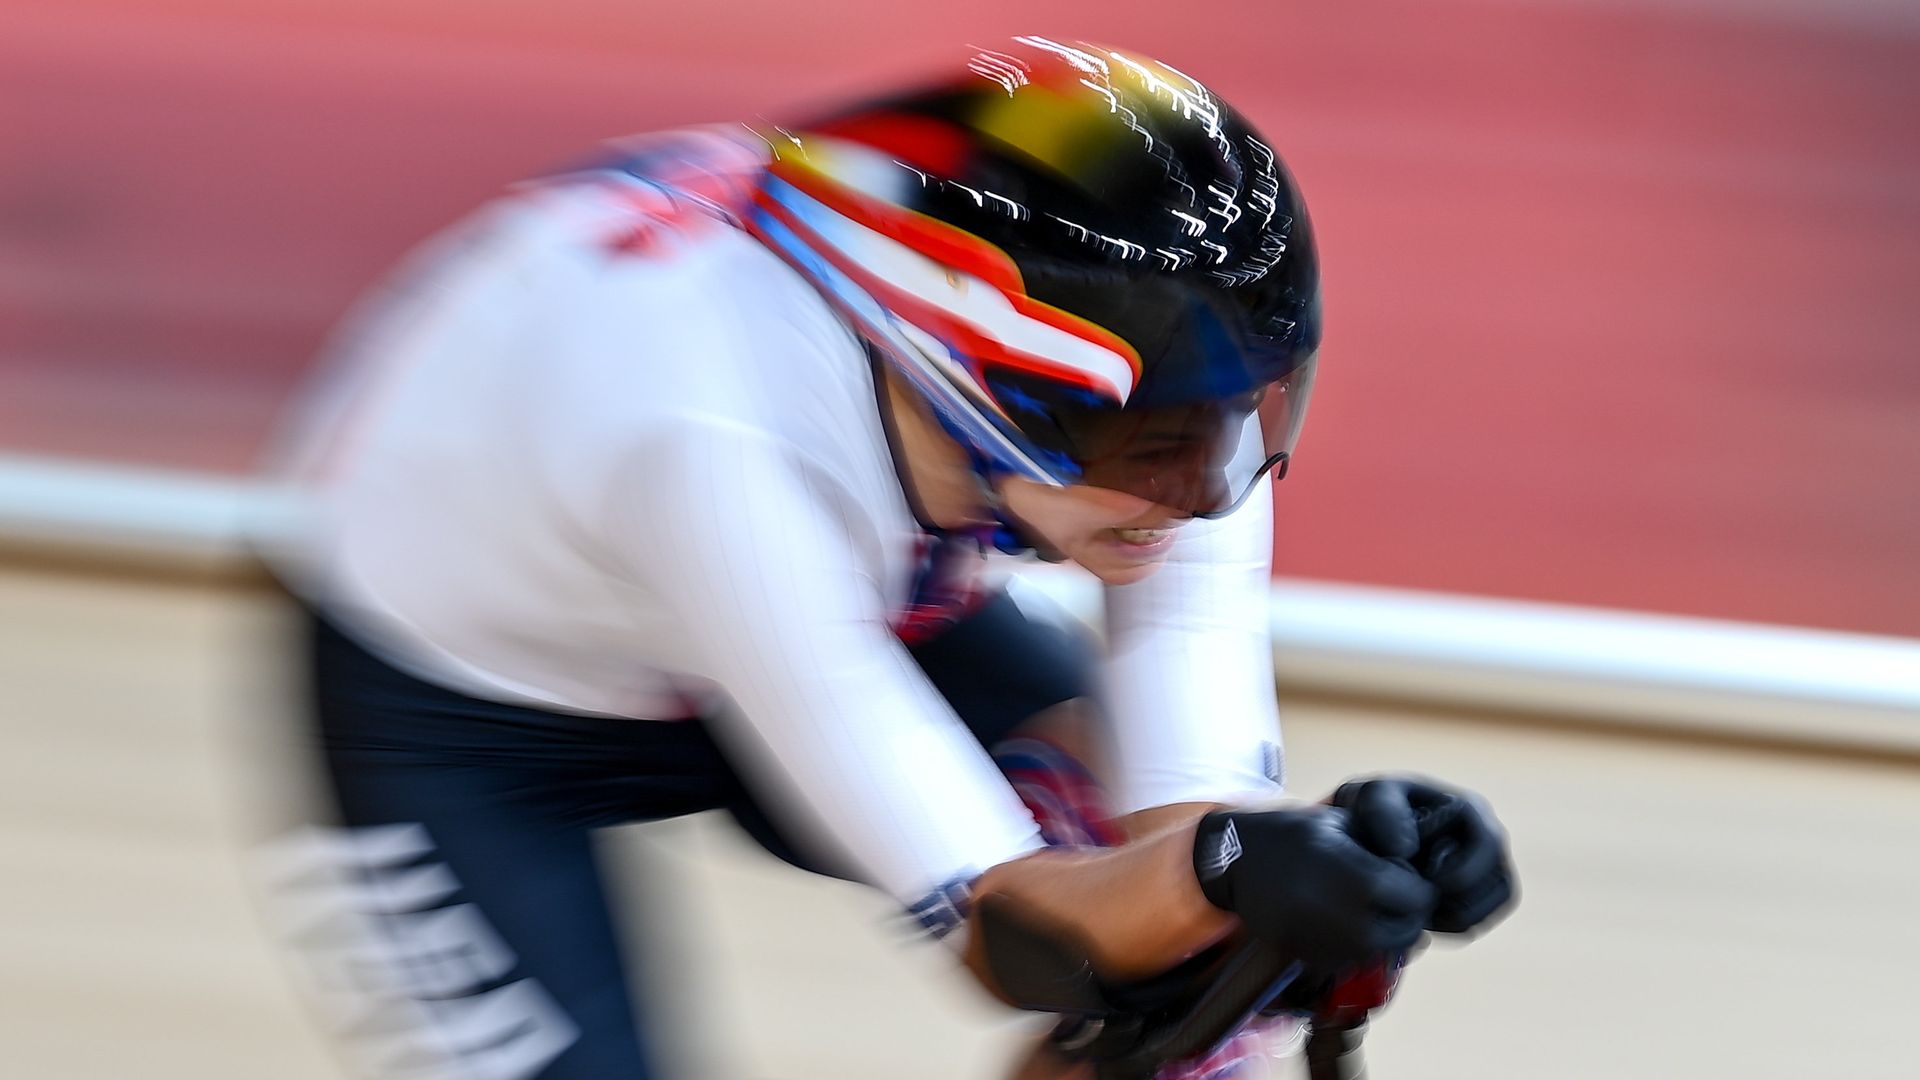 Shawn Morelli of USA competing in the Women's C4 3000m Individual Pursuit at the Izu velodrome on day one during the 2020 Tokyo Summer Olympic Games in Shizuoka, Japan. 